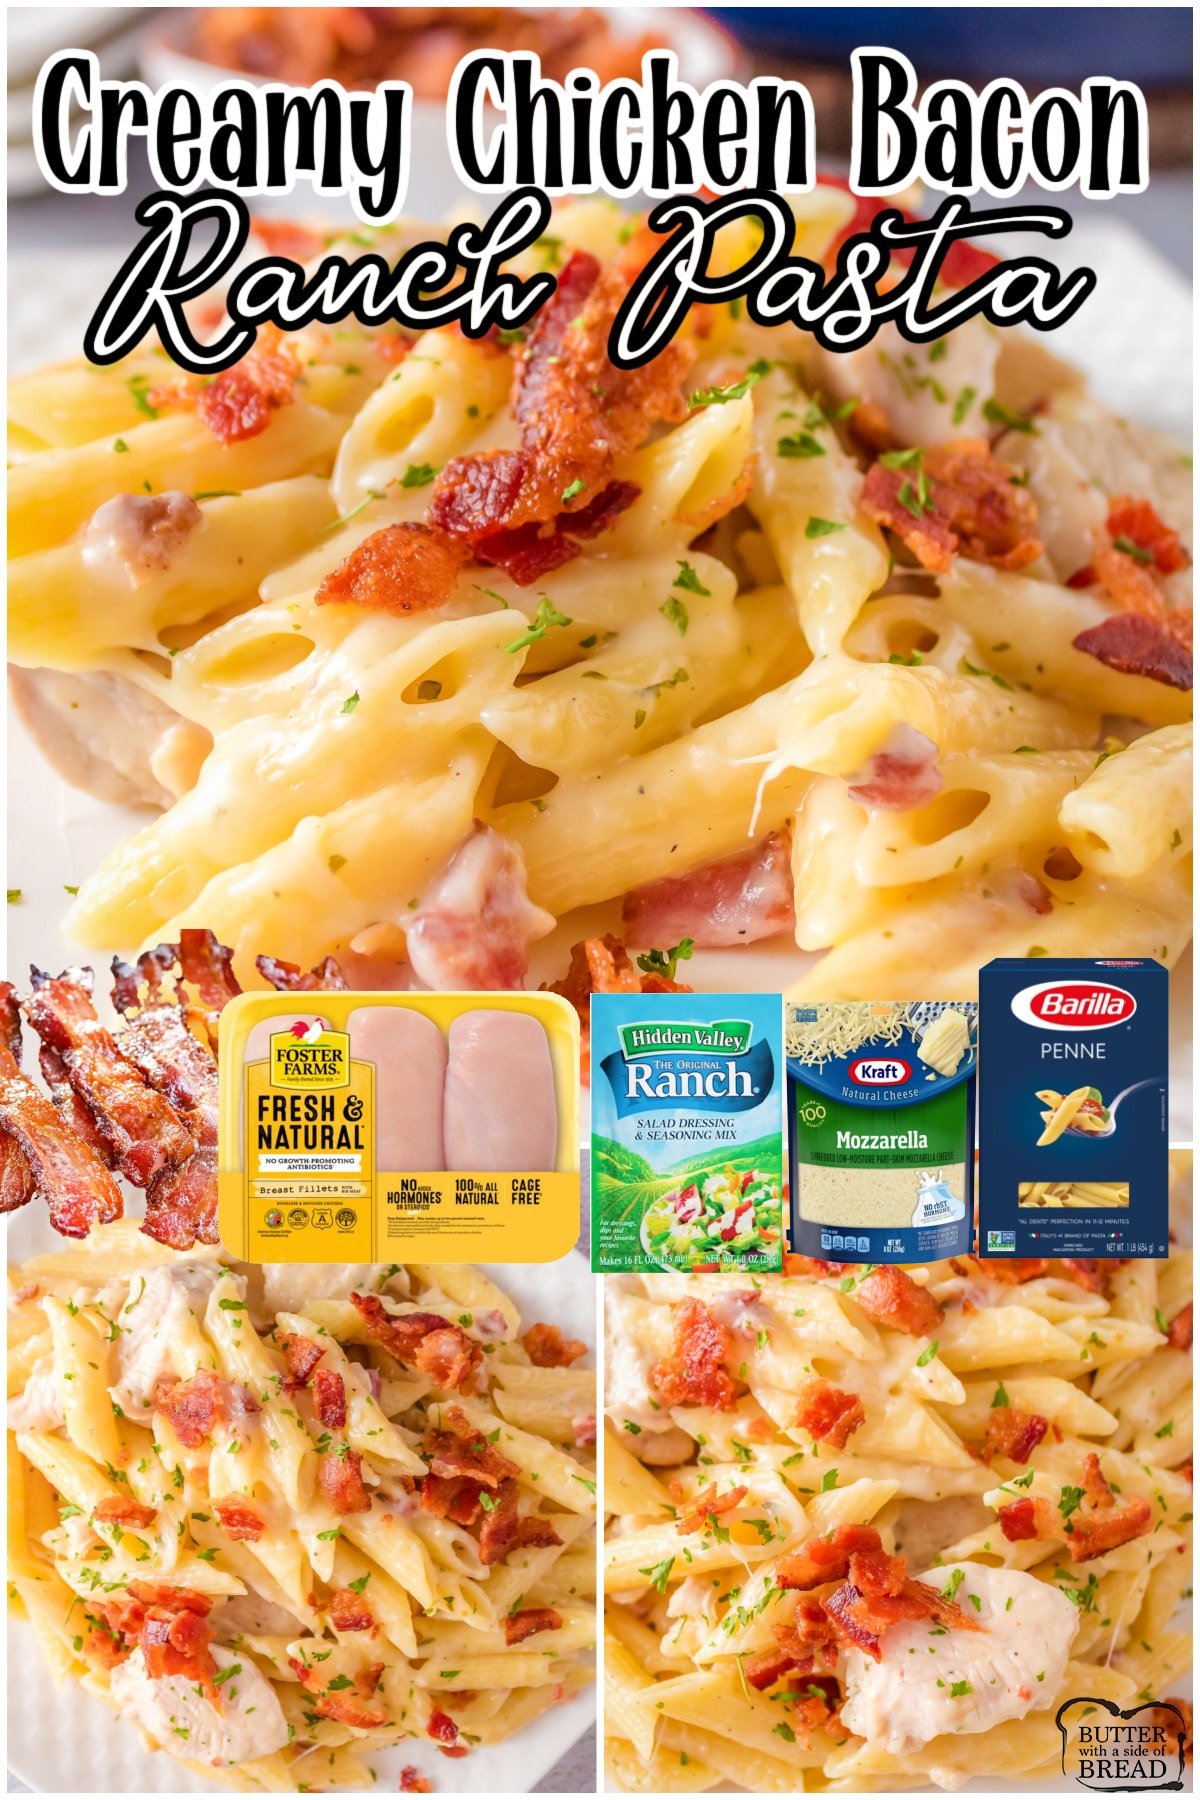 Chicken Bacon Ranch Pasta made with simple ingredients for an easy, flavorful weeknight dinner! Creamy, cheesy chicken pasta with bacon.